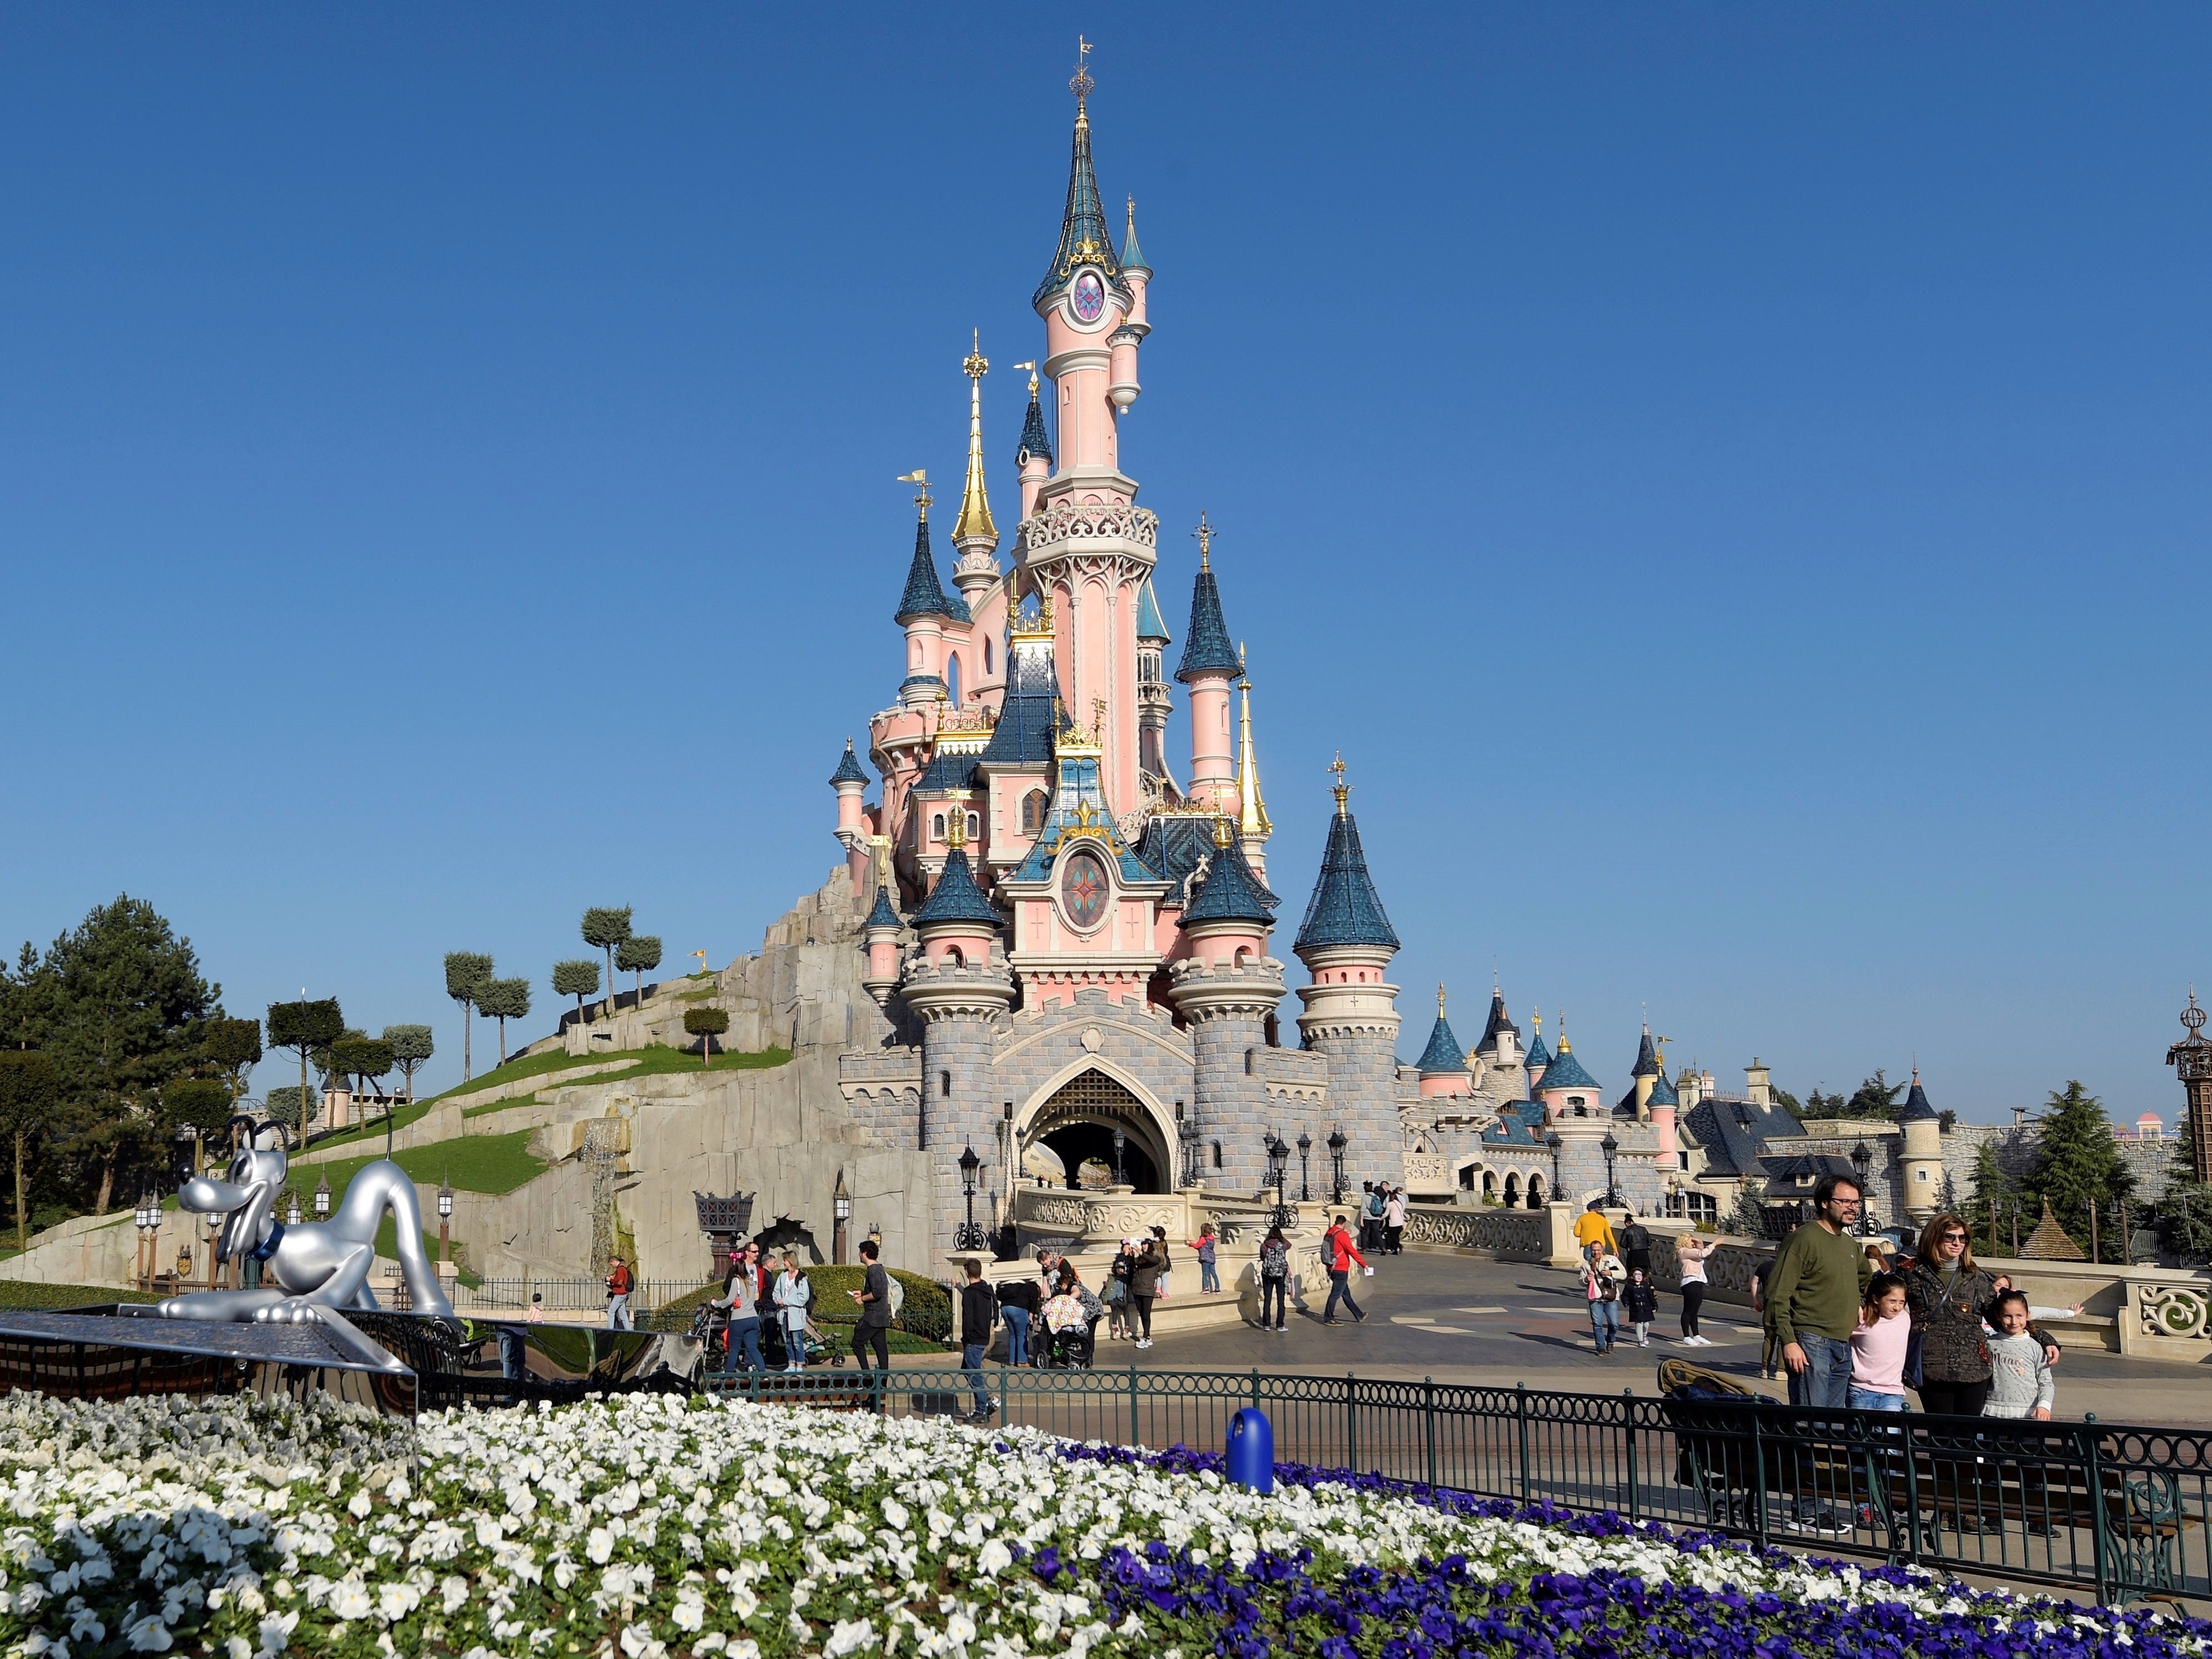 The Sleeping Beauty Castle of Disneyland pictured on 16 March, 2017 in Marne-La-Vallee, east of the French capital Paris